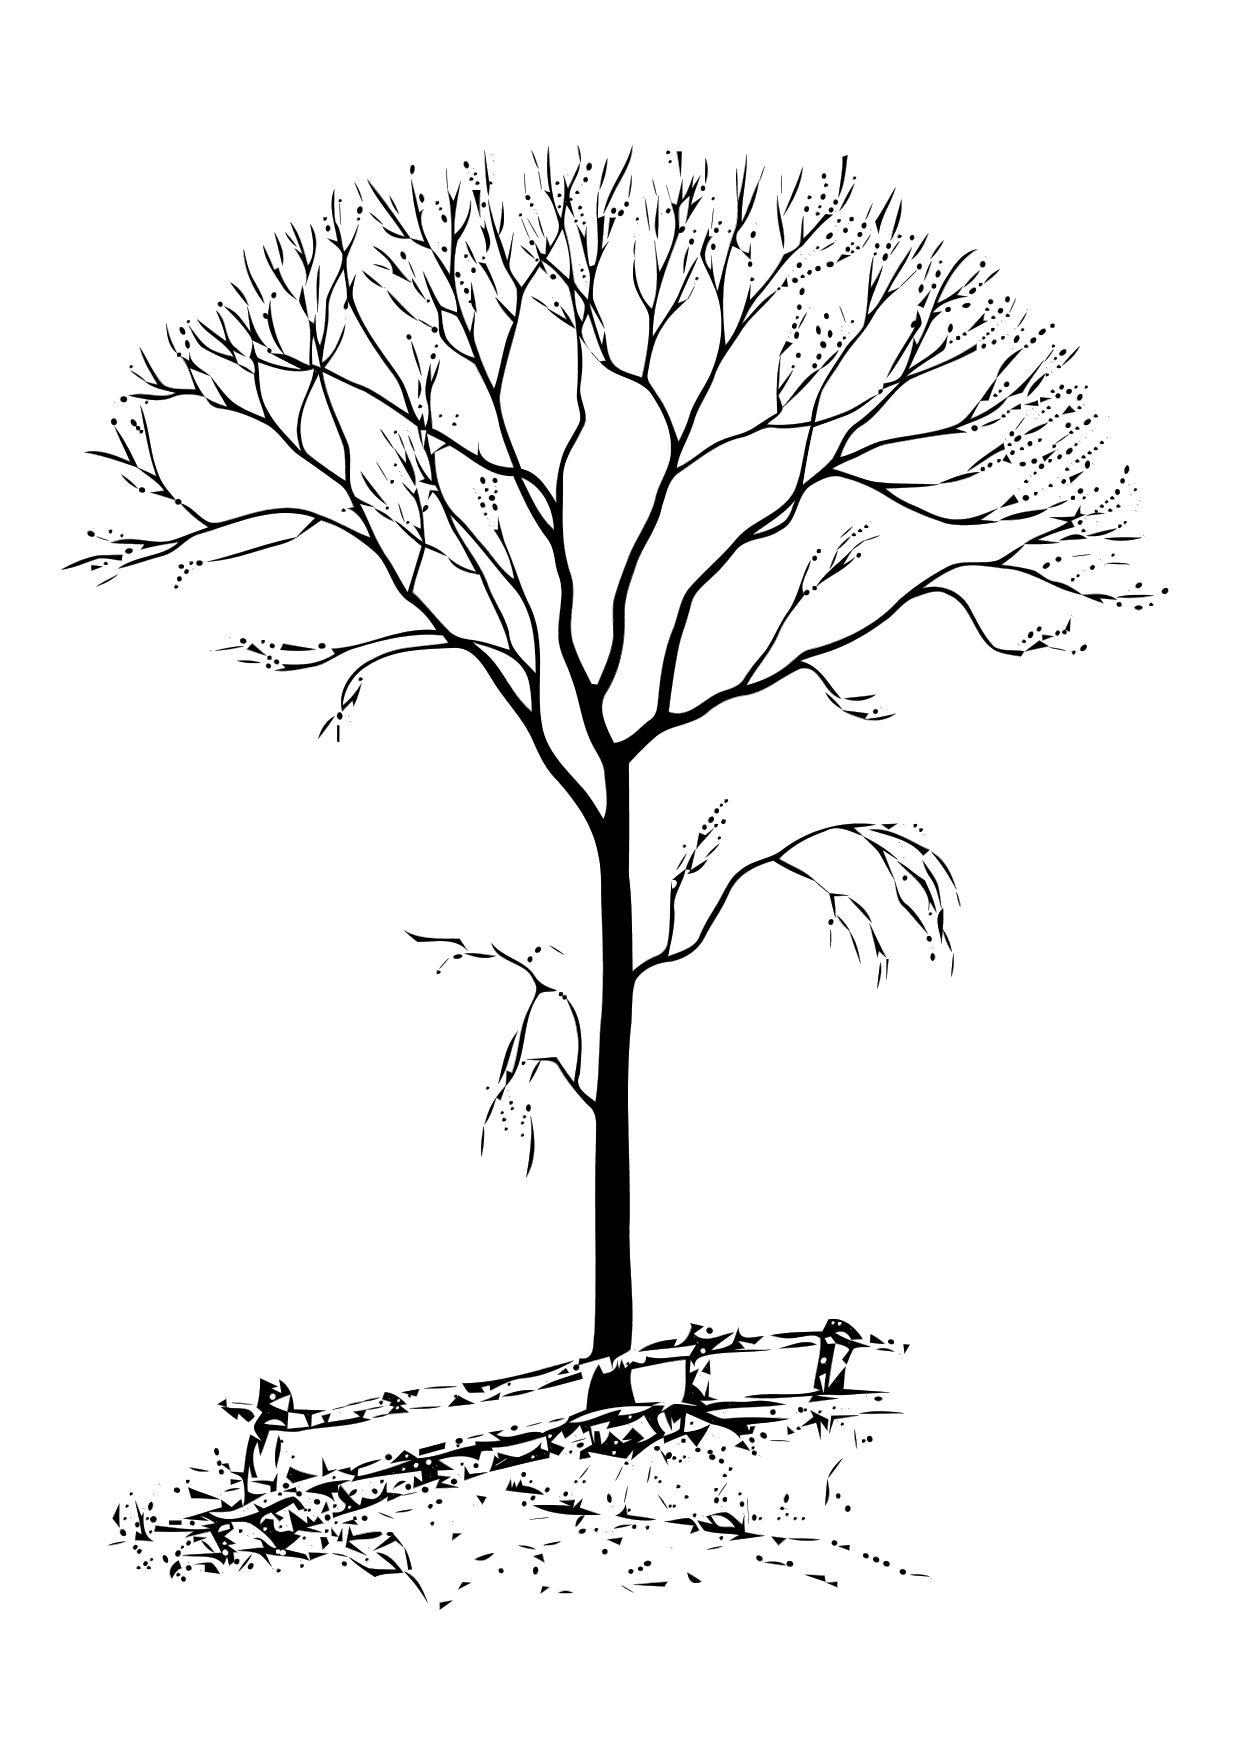 Coloring page bare tree - img 11331.